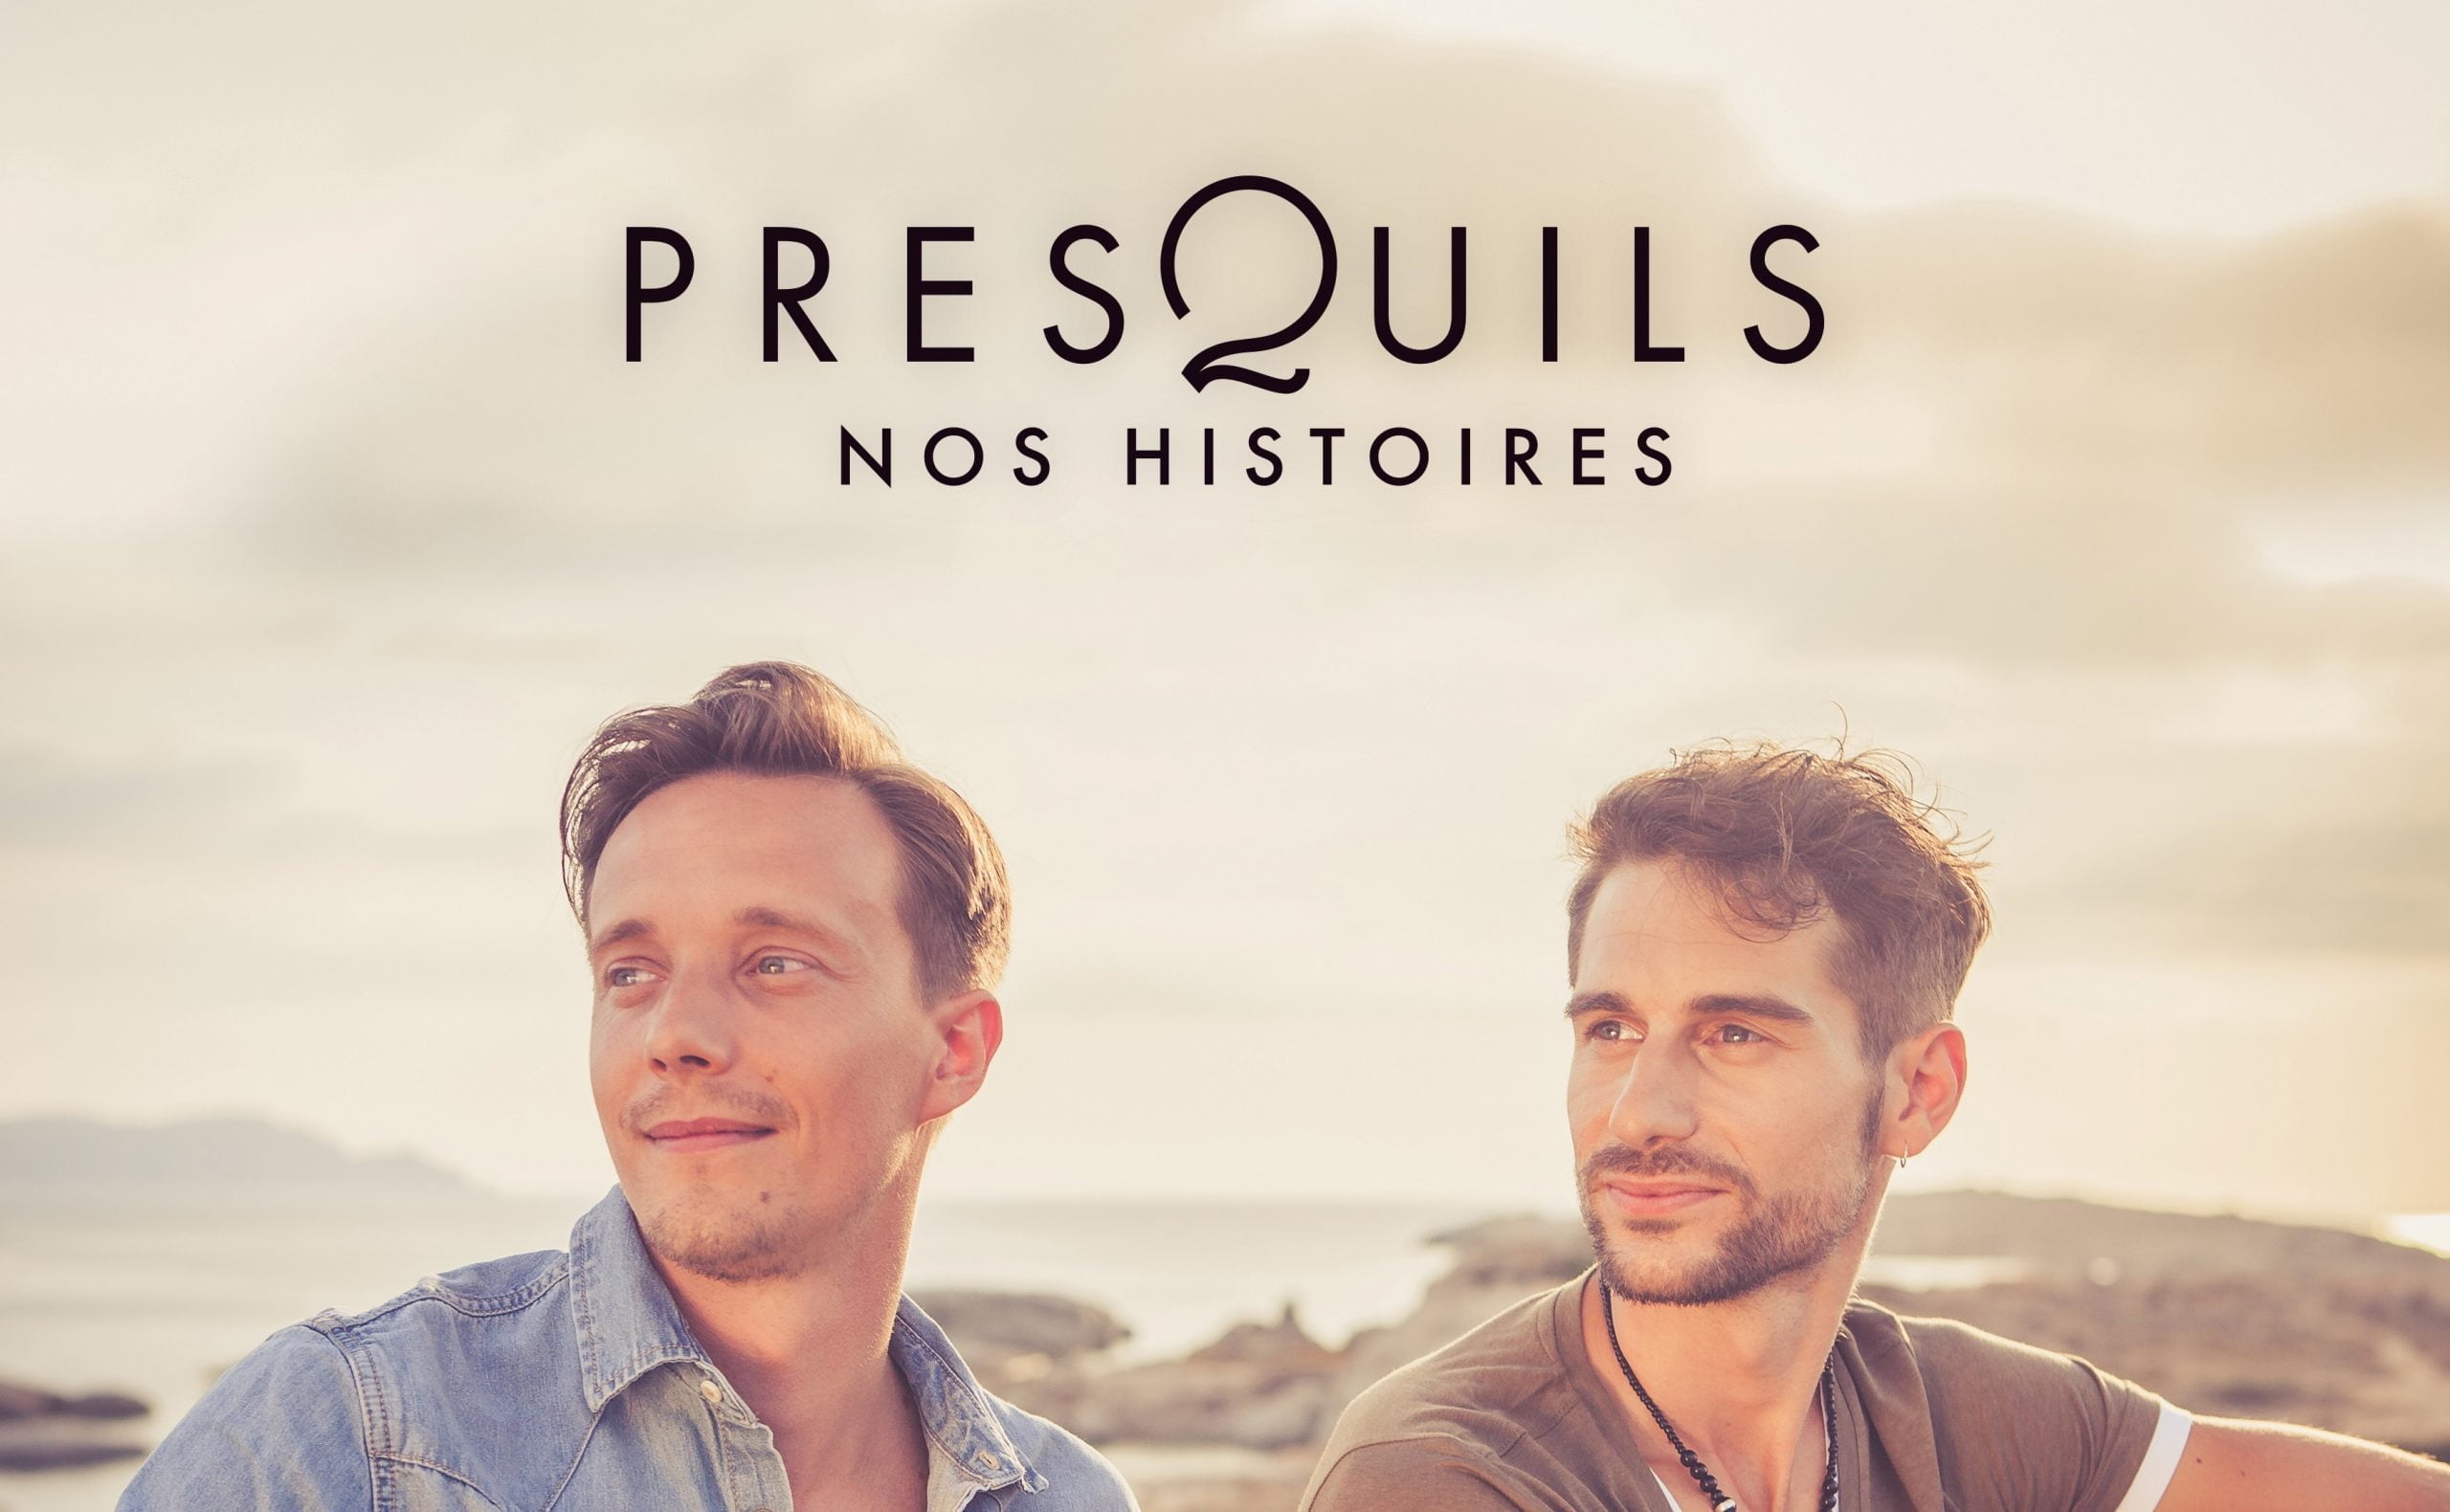 Cover Presquils Nos Histoires e1507632230938 scaled Découvrez le 1er single de Presquils : « Nos Histoires »